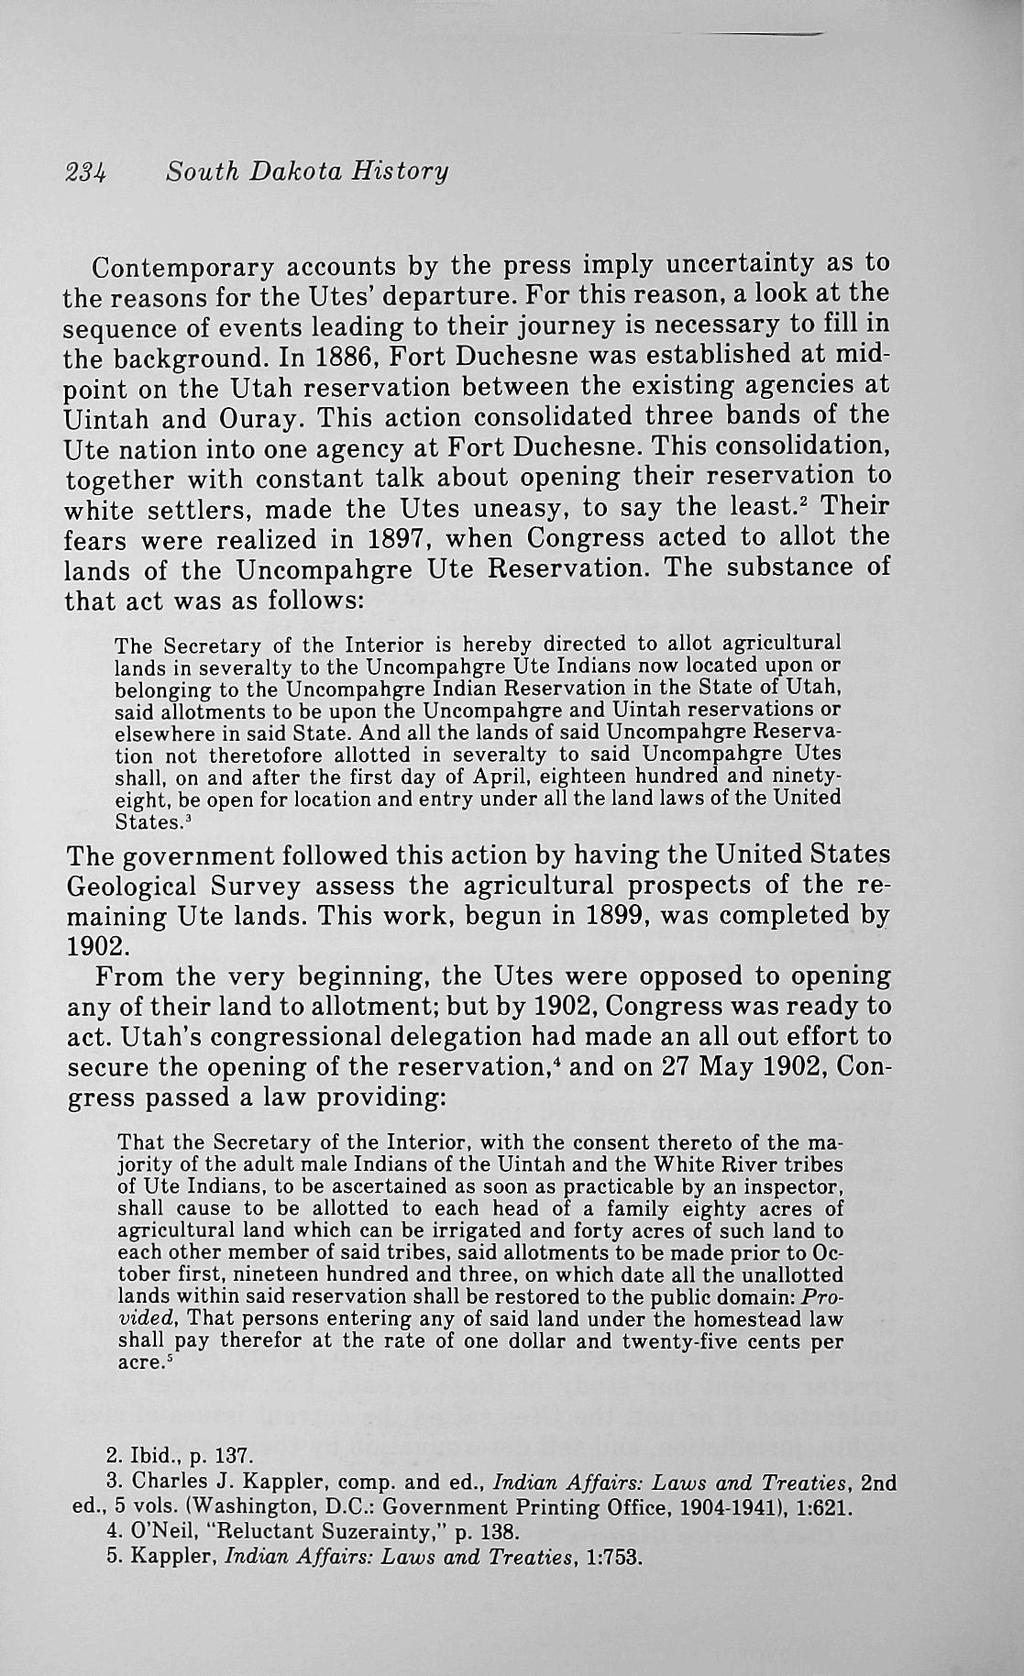 23Ji South Dakota History Contemporary accounts by the press imply uncertainty as to the reasons for the Utes' departure.